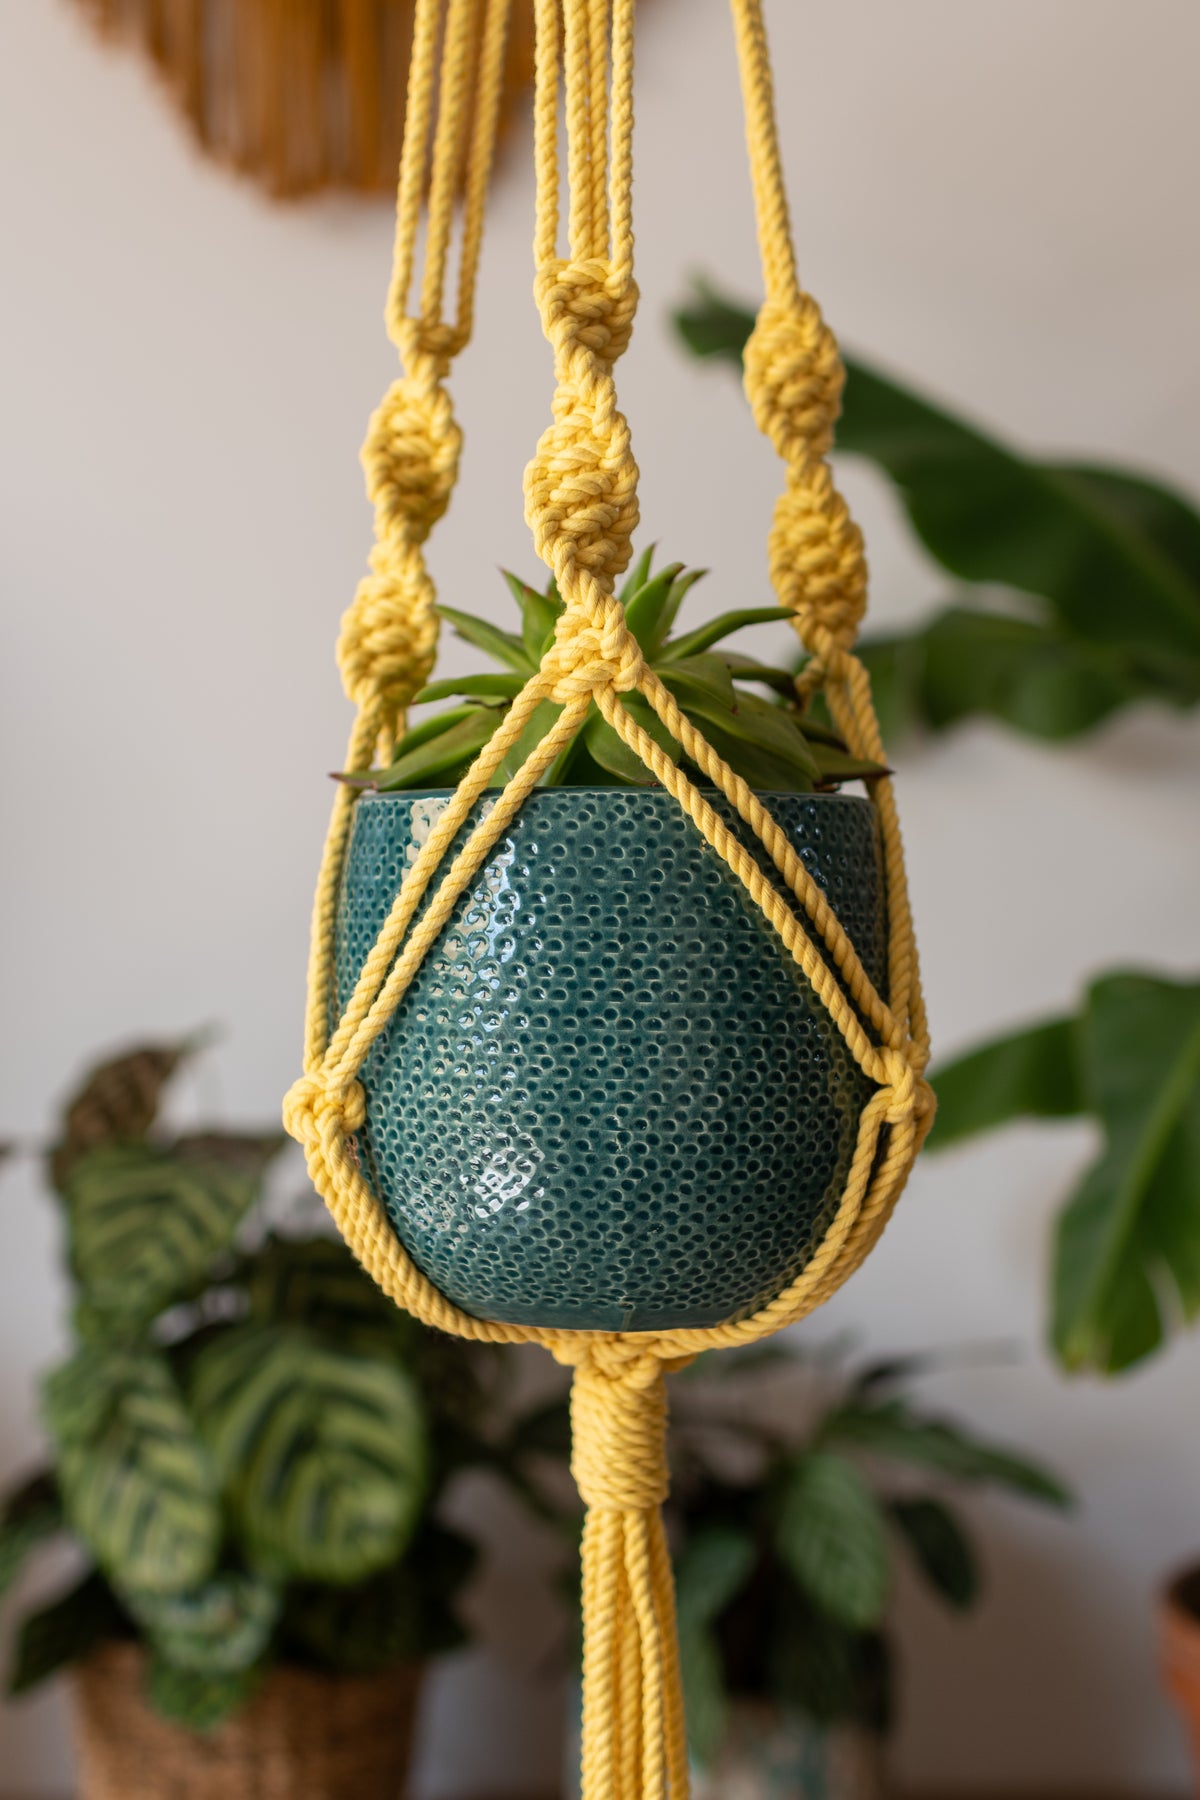 Knotted Macrame Plant Hanger - 40&quot; (100cm) in Length by